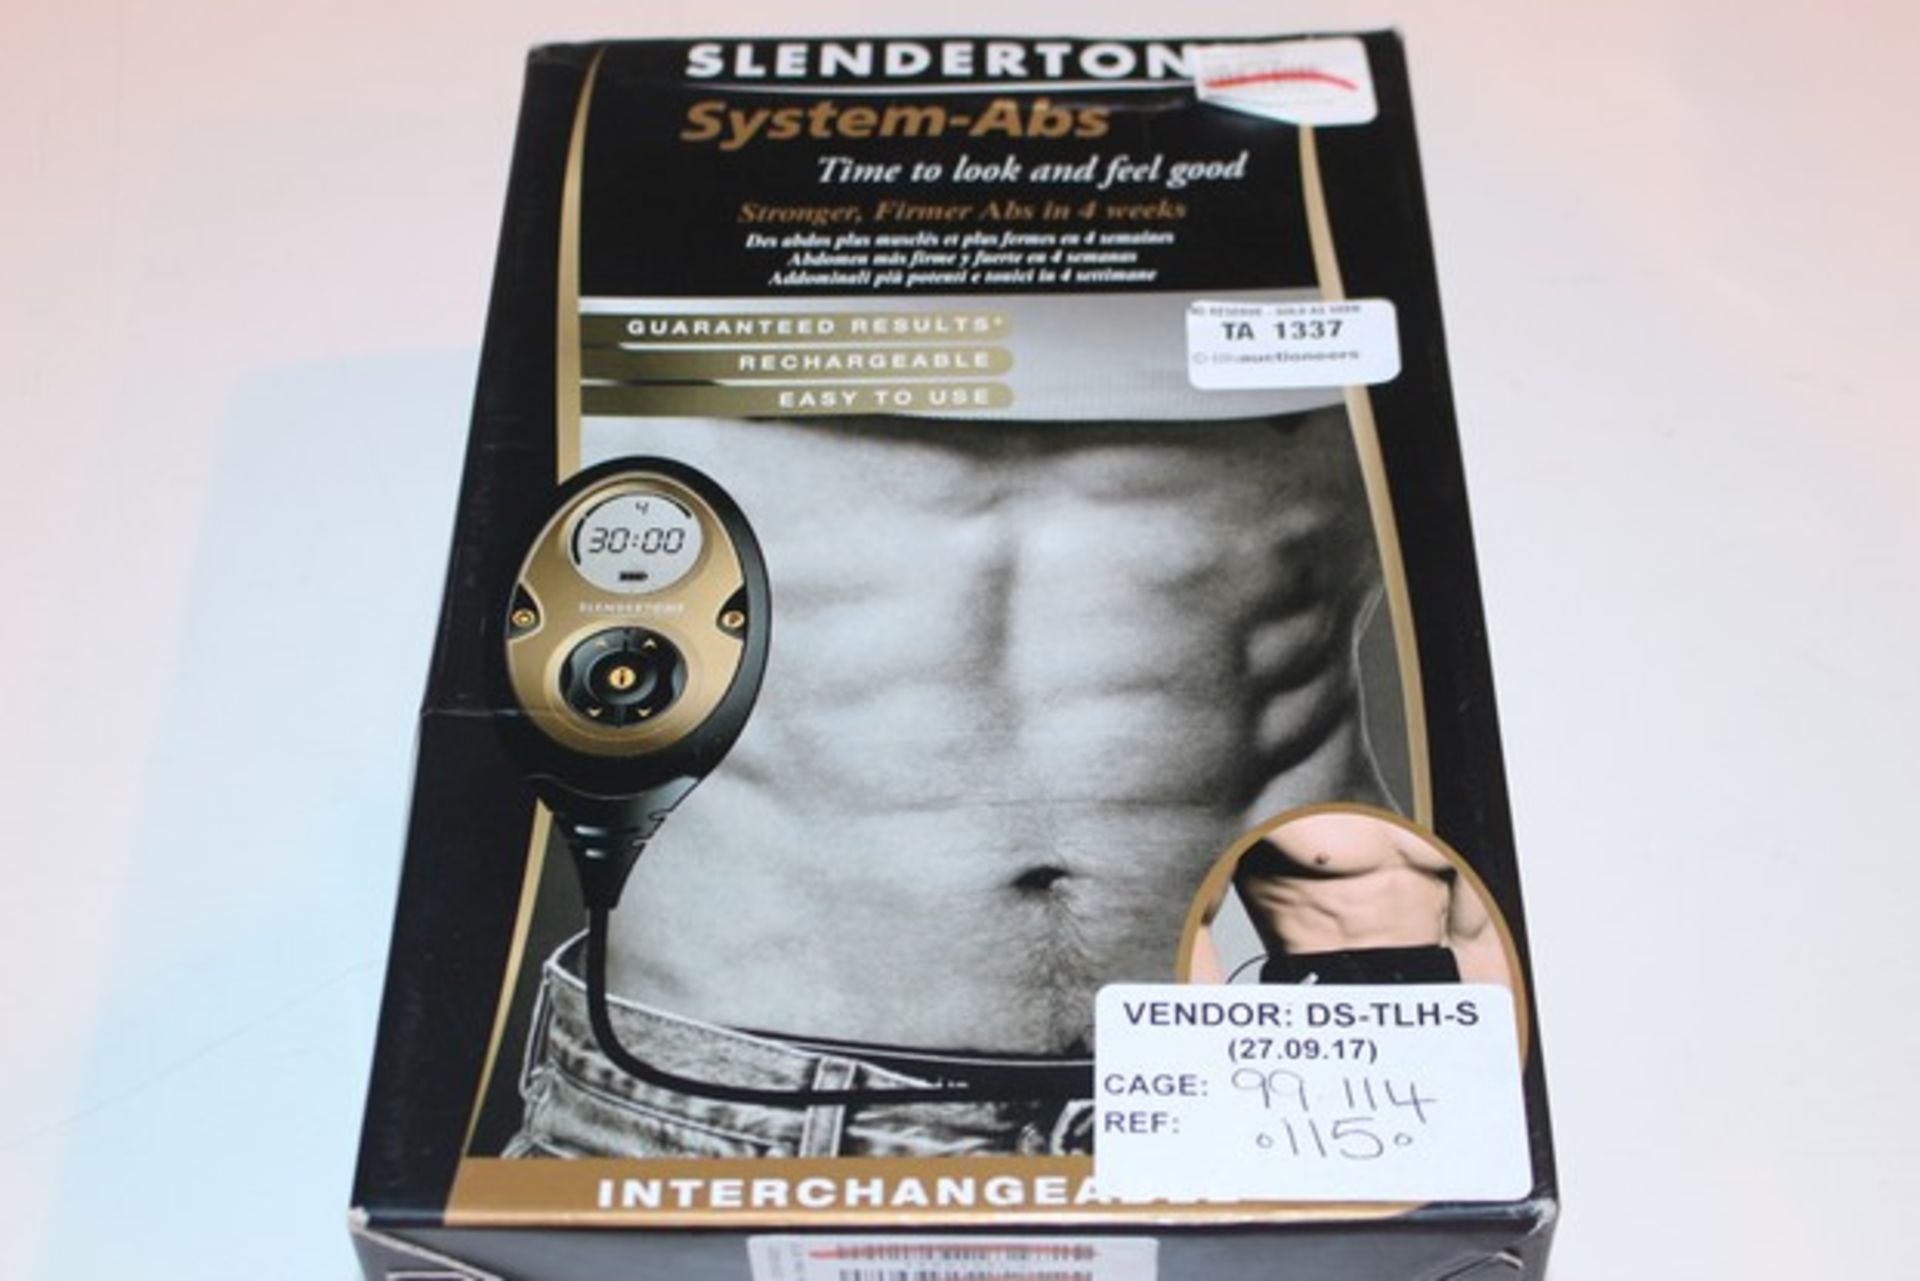 1X BOXED SLENDER TONE SYSTEM ABS RRP £115 (DS-TLH-S) (27.09.17) (99.114)